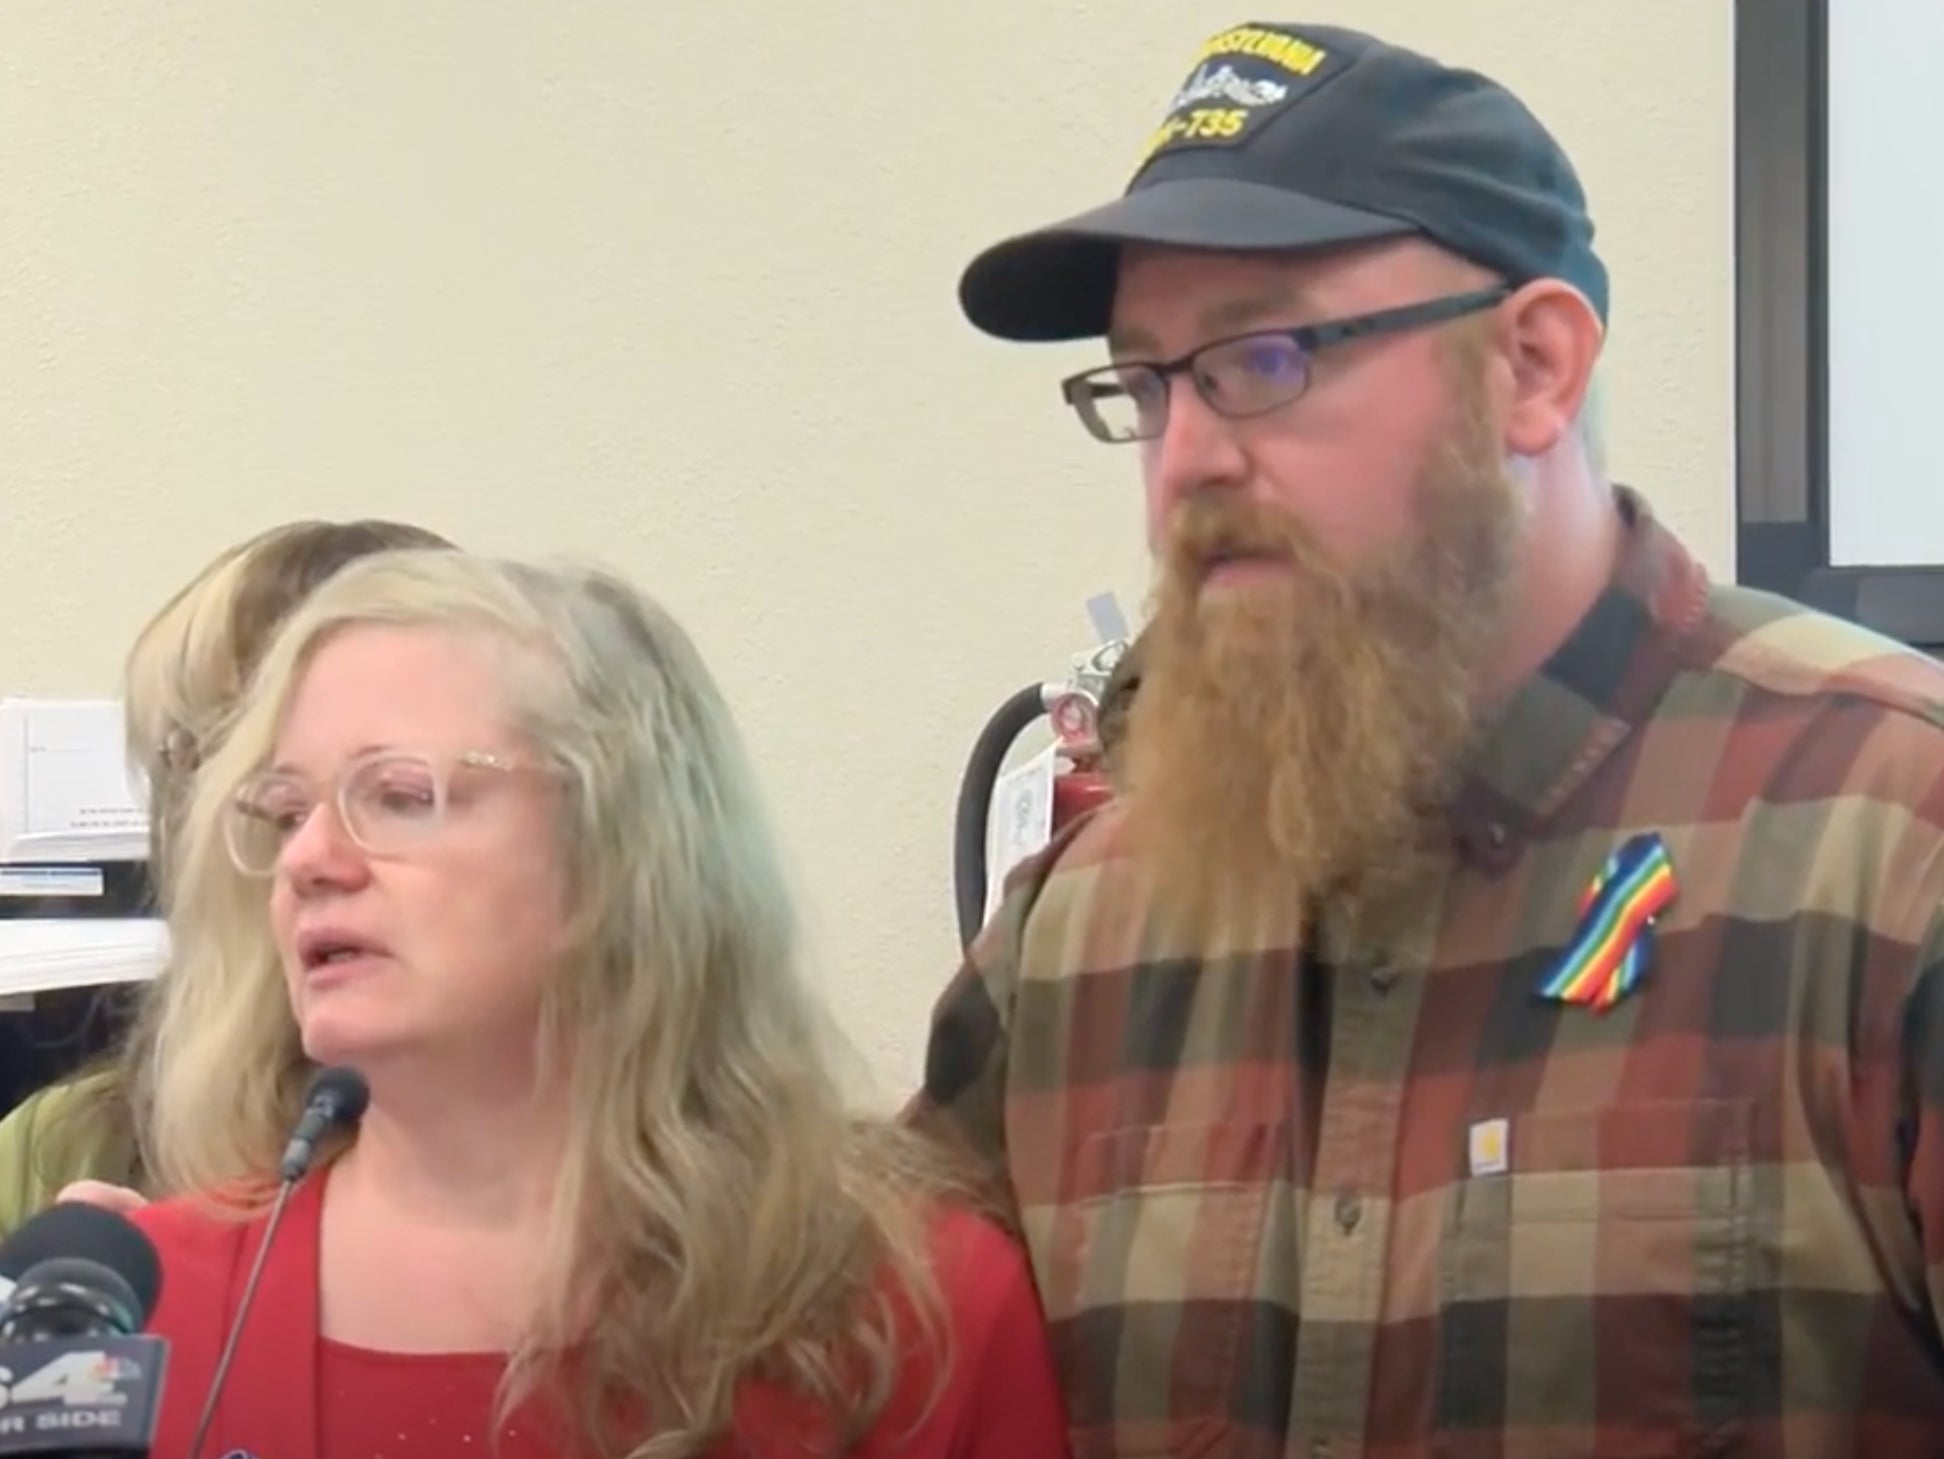 Naomi Irion’s mother Diana (left) and brother Casey Valley (right) plead for information about her whereabouts at a press conference on 22 March